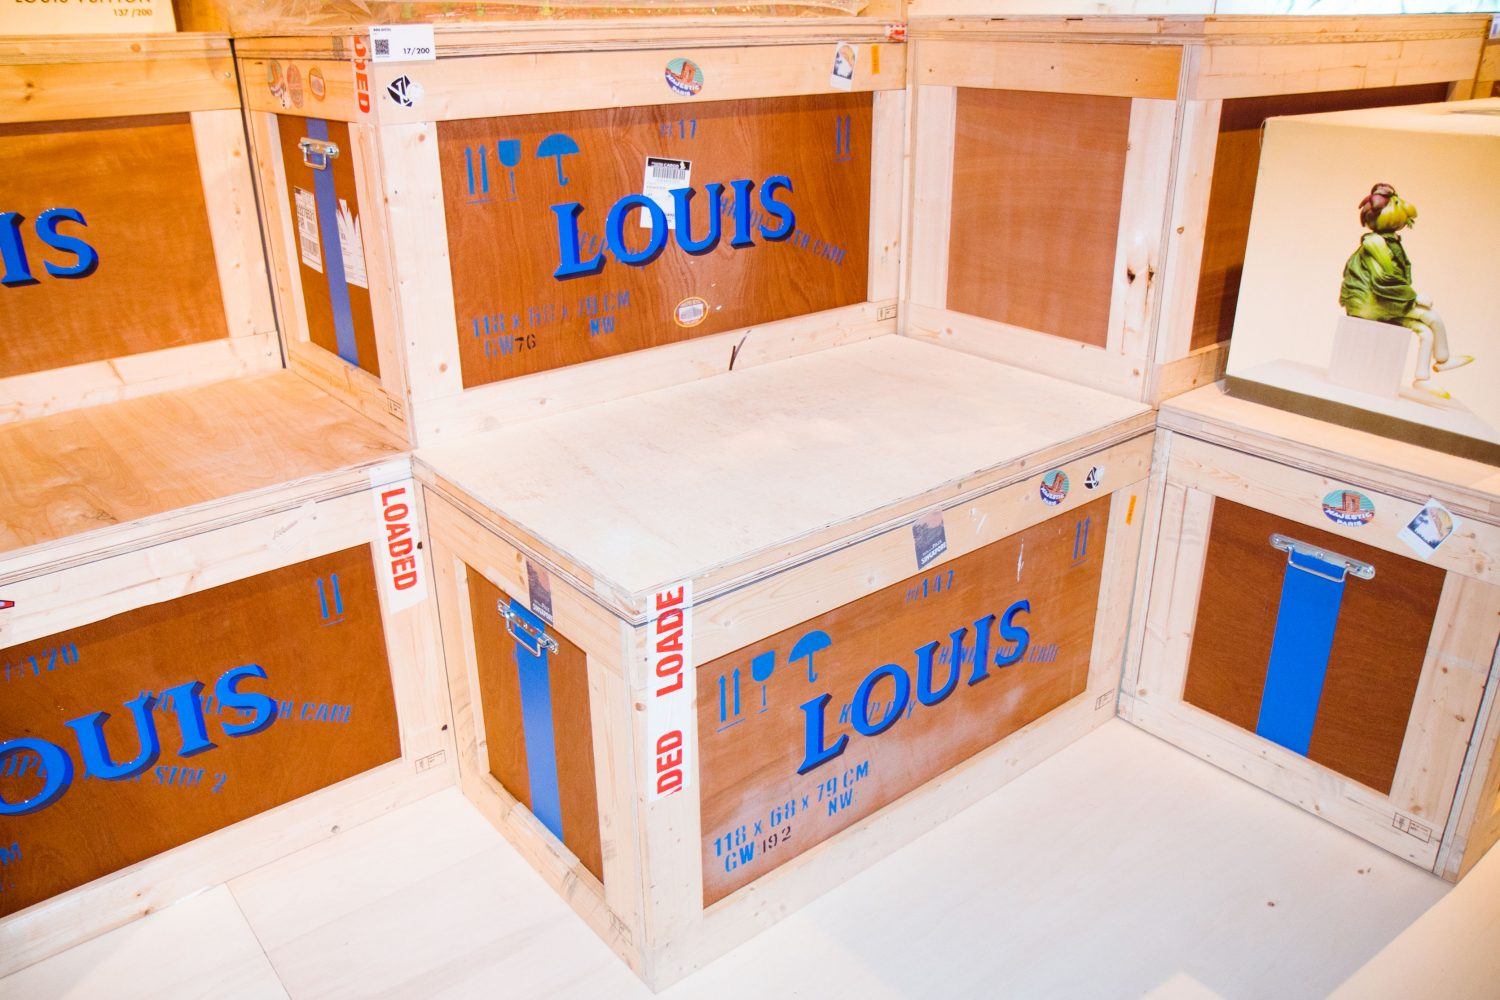 In New York, “Louis Vuitton: 200 Trunks, 200 Visionaries” Celebrates  Out-of-the-Box Creativity